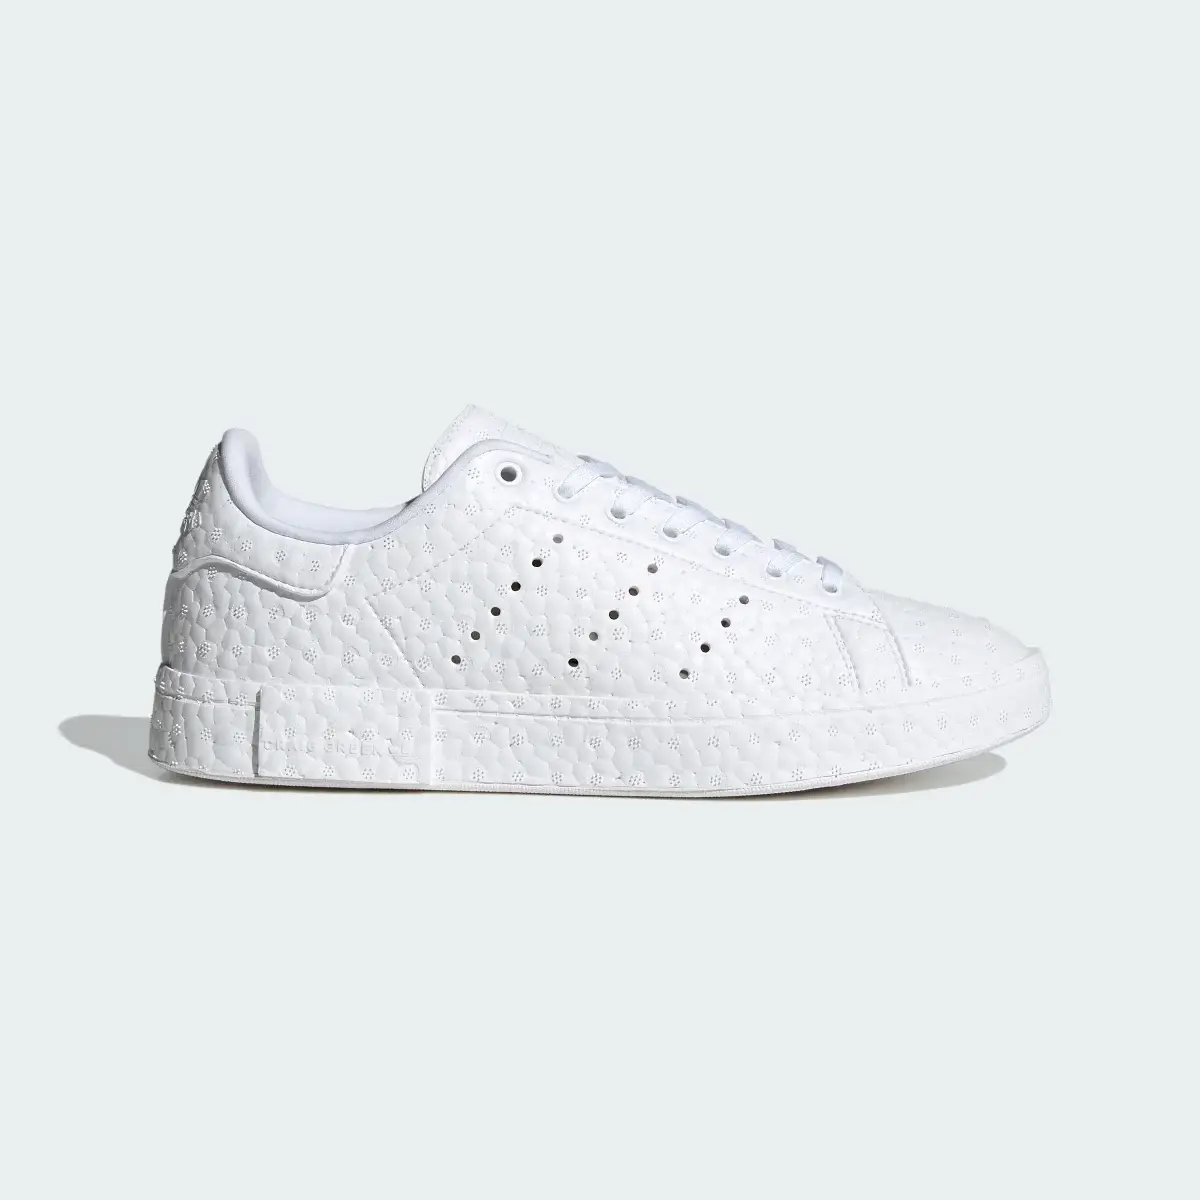 Adidas Craig Green Stan Smith BOOST Low Trainers. 2